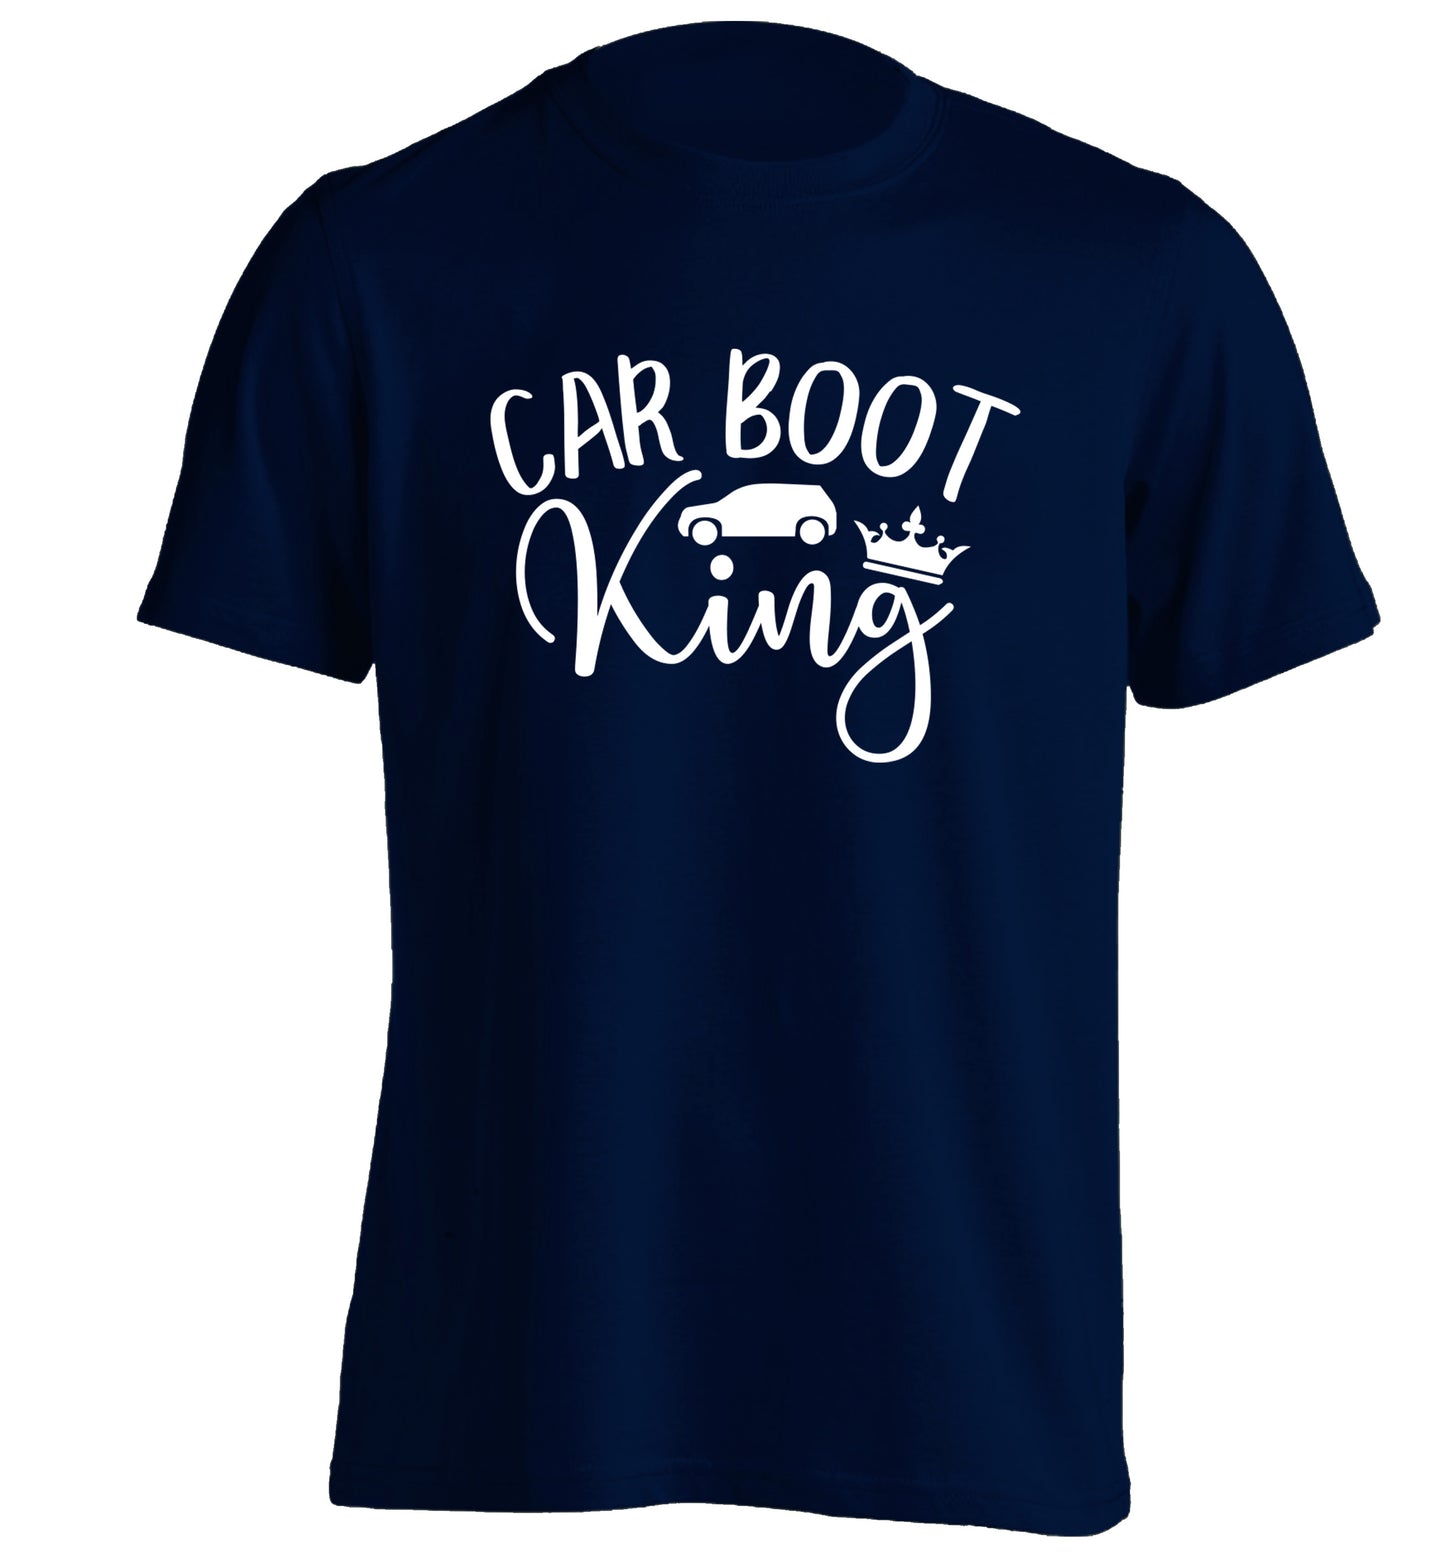 Carboot King adults unisex navy Tshirt 2XL